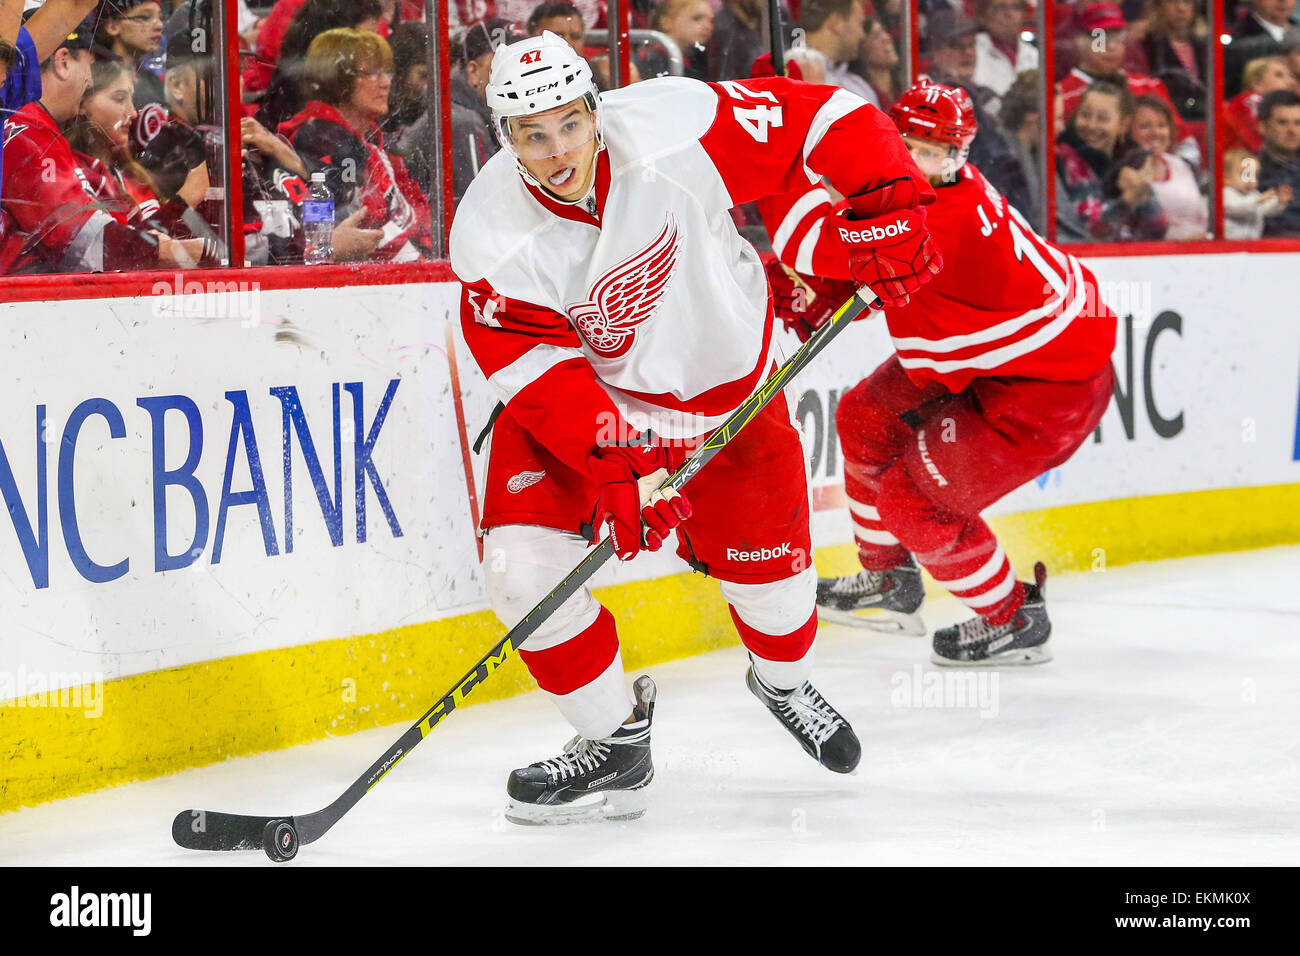 Raleigh, North Carolina, USA. 11th Apr, 2015. Detroit Red Wings defenseman Alexei Marchenko (47) during the NHL game between the Detroit Red Wings and the Carolina Hurricanes at the PNC Arena. The Red Wings defeated the Carolina Hurricanes 2-0. © Andy Martin Jr./ZUMA Wire/Alamy Live News Stock Photo